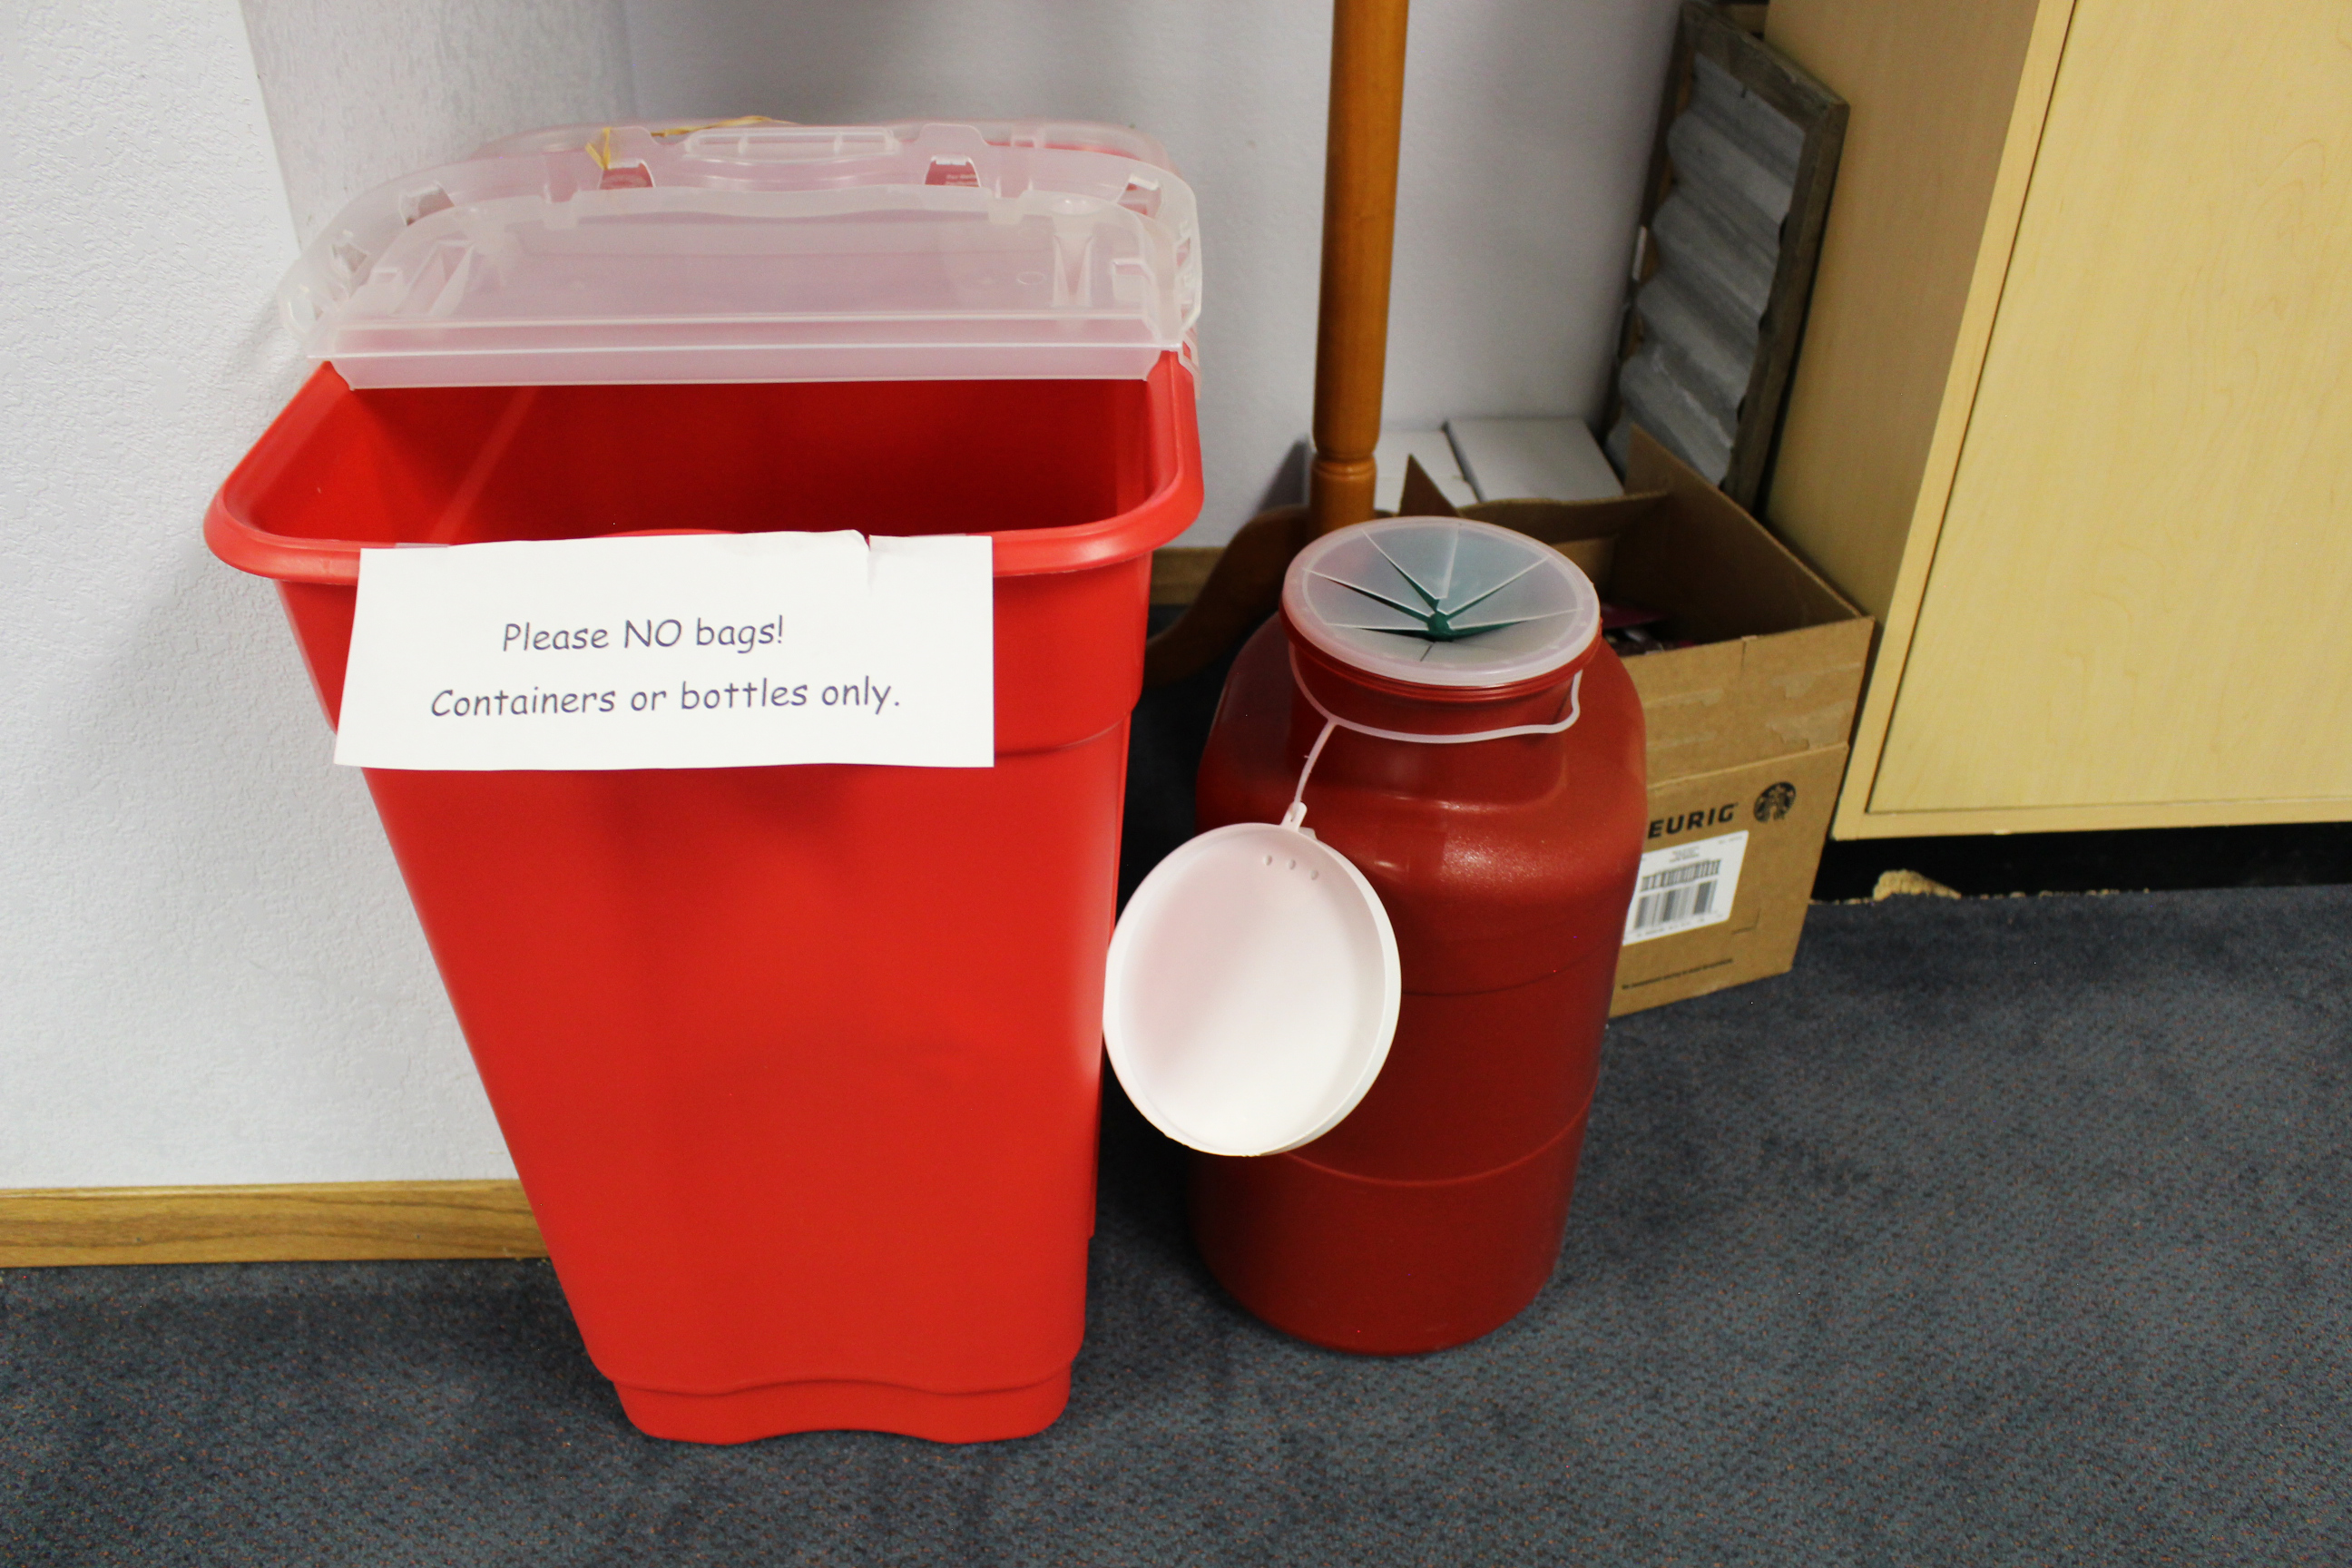 A photo shows a needle disposal box and a wastebin. The wastebin, on the left, has a sign that reads, "Please NO bags! Containers or bottles only."